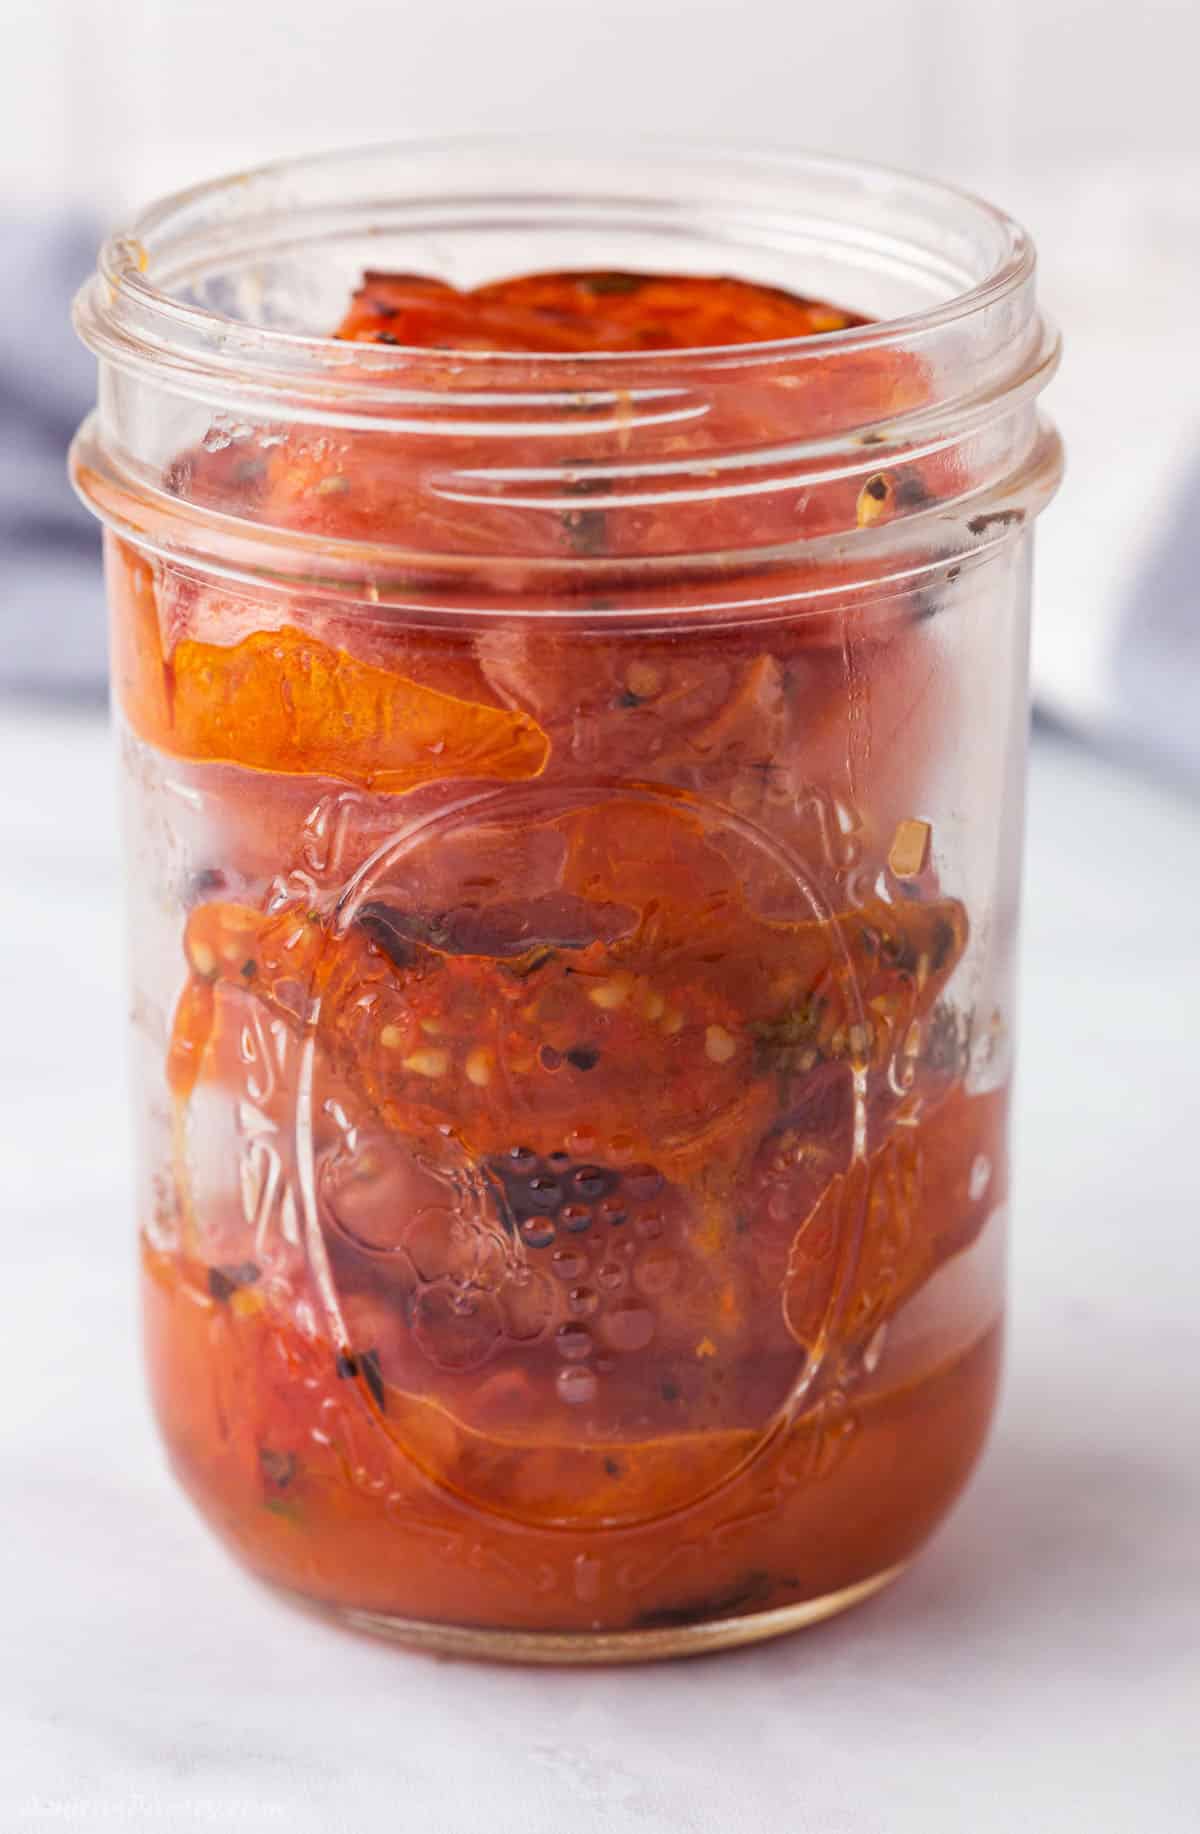 Roasted tomato in a jar.